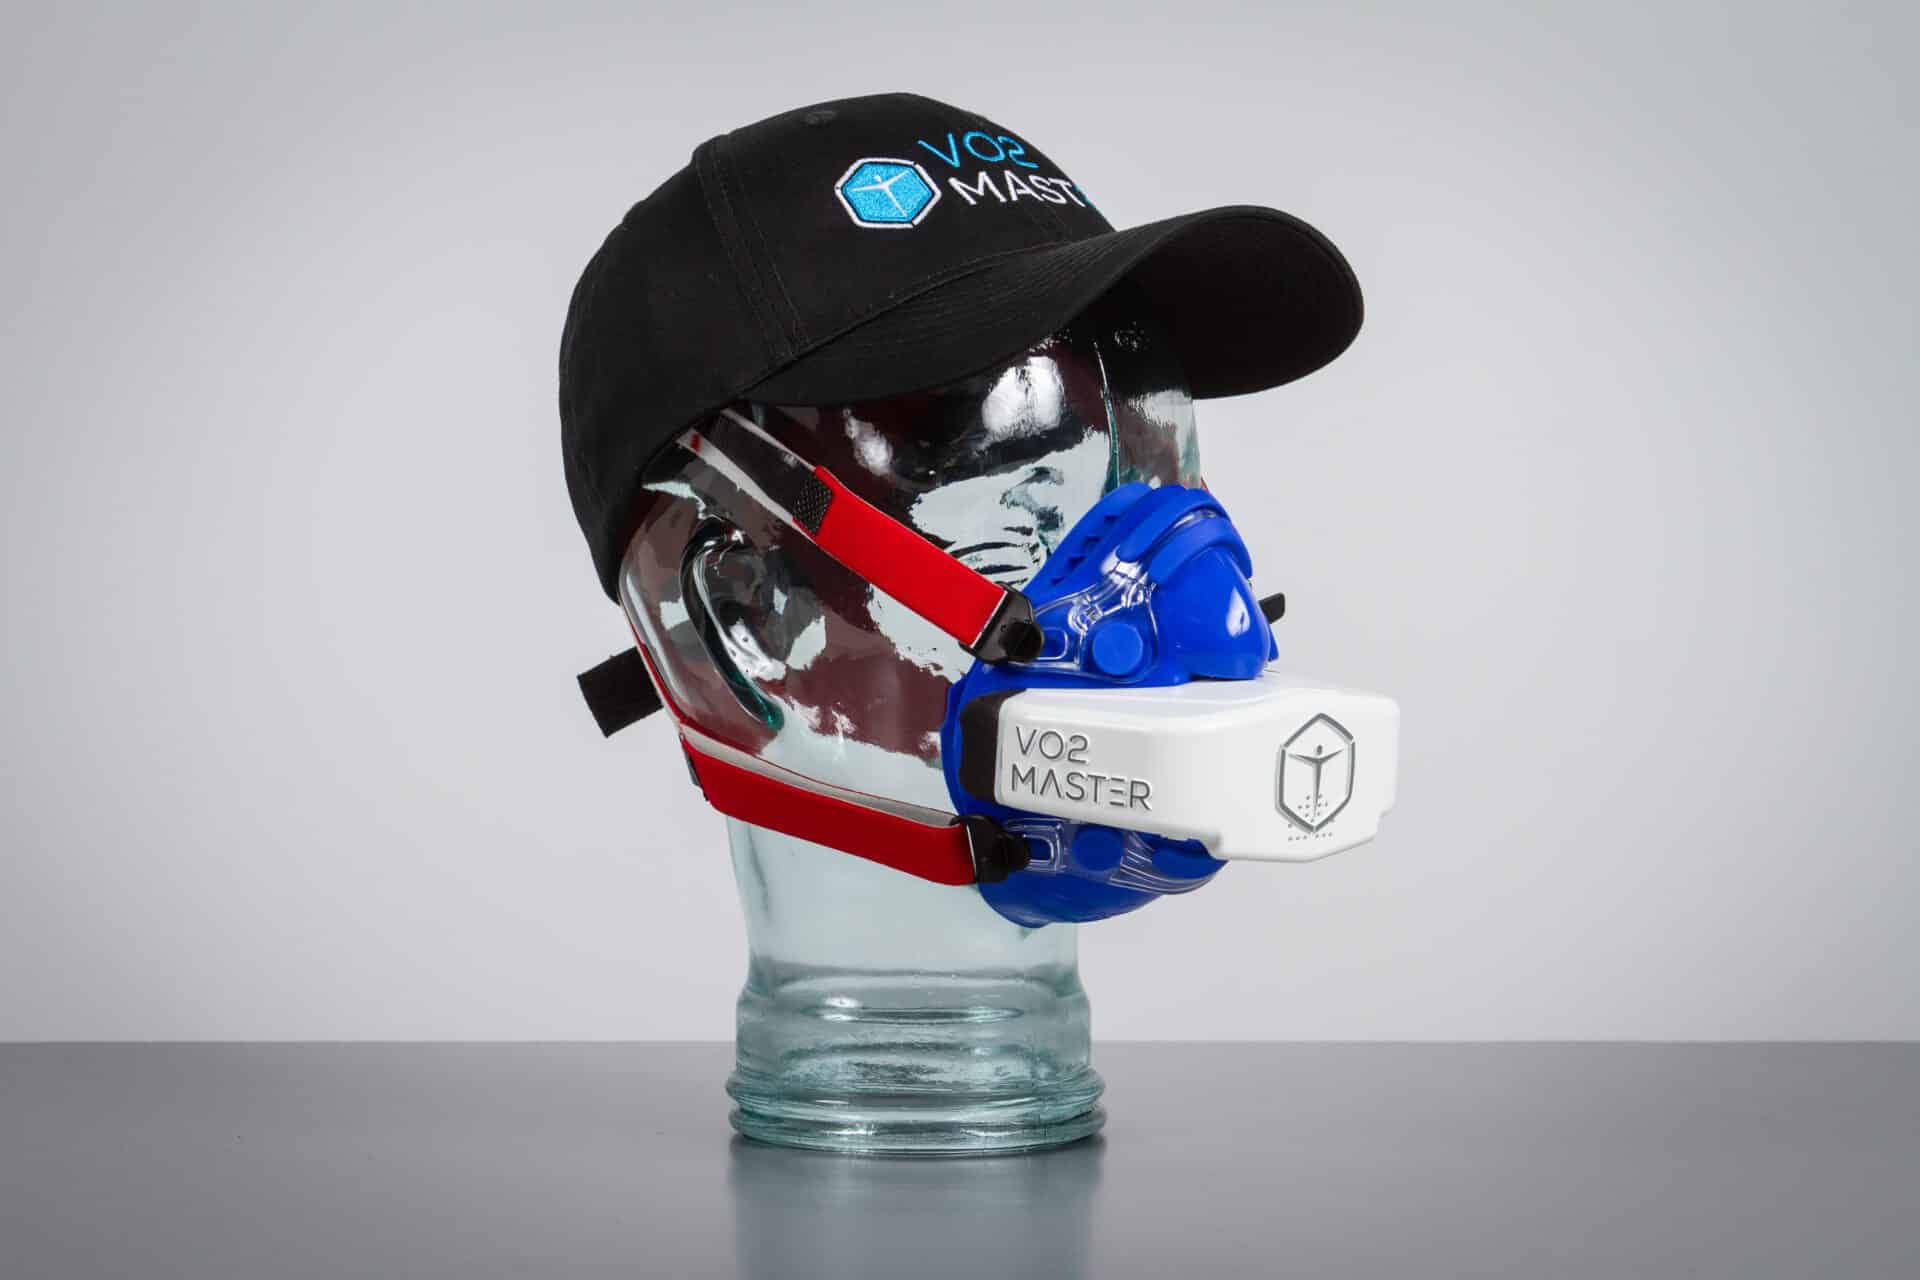 Glass mannequin with with VO2 Master logo hat and metabolic analyzer/blue Hans Rudolph mask